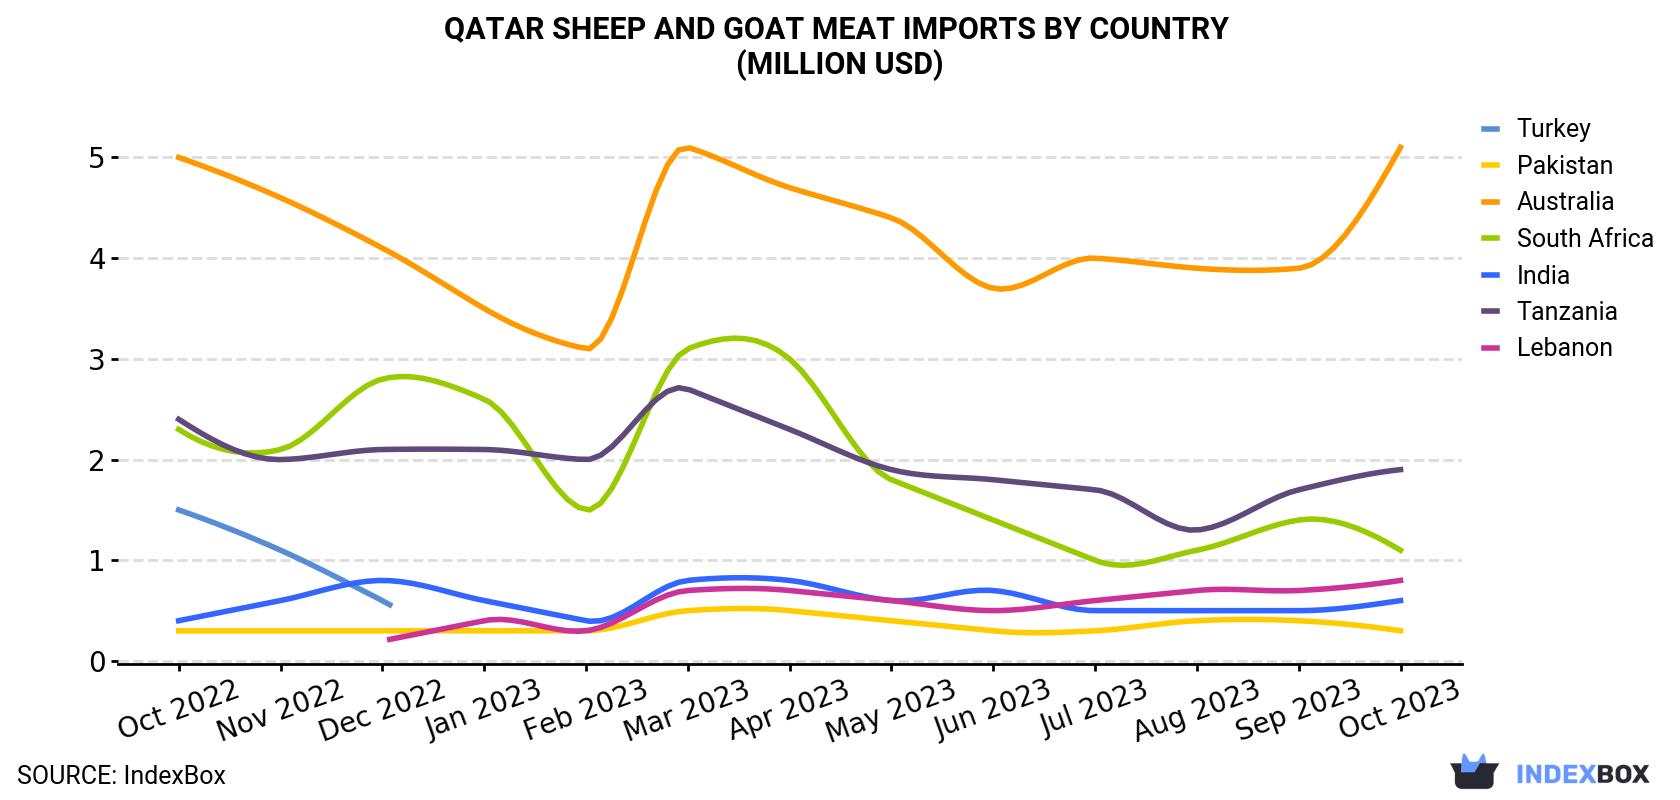 Qatar Sheep And Goat Meat Imports By Country (Million USD)